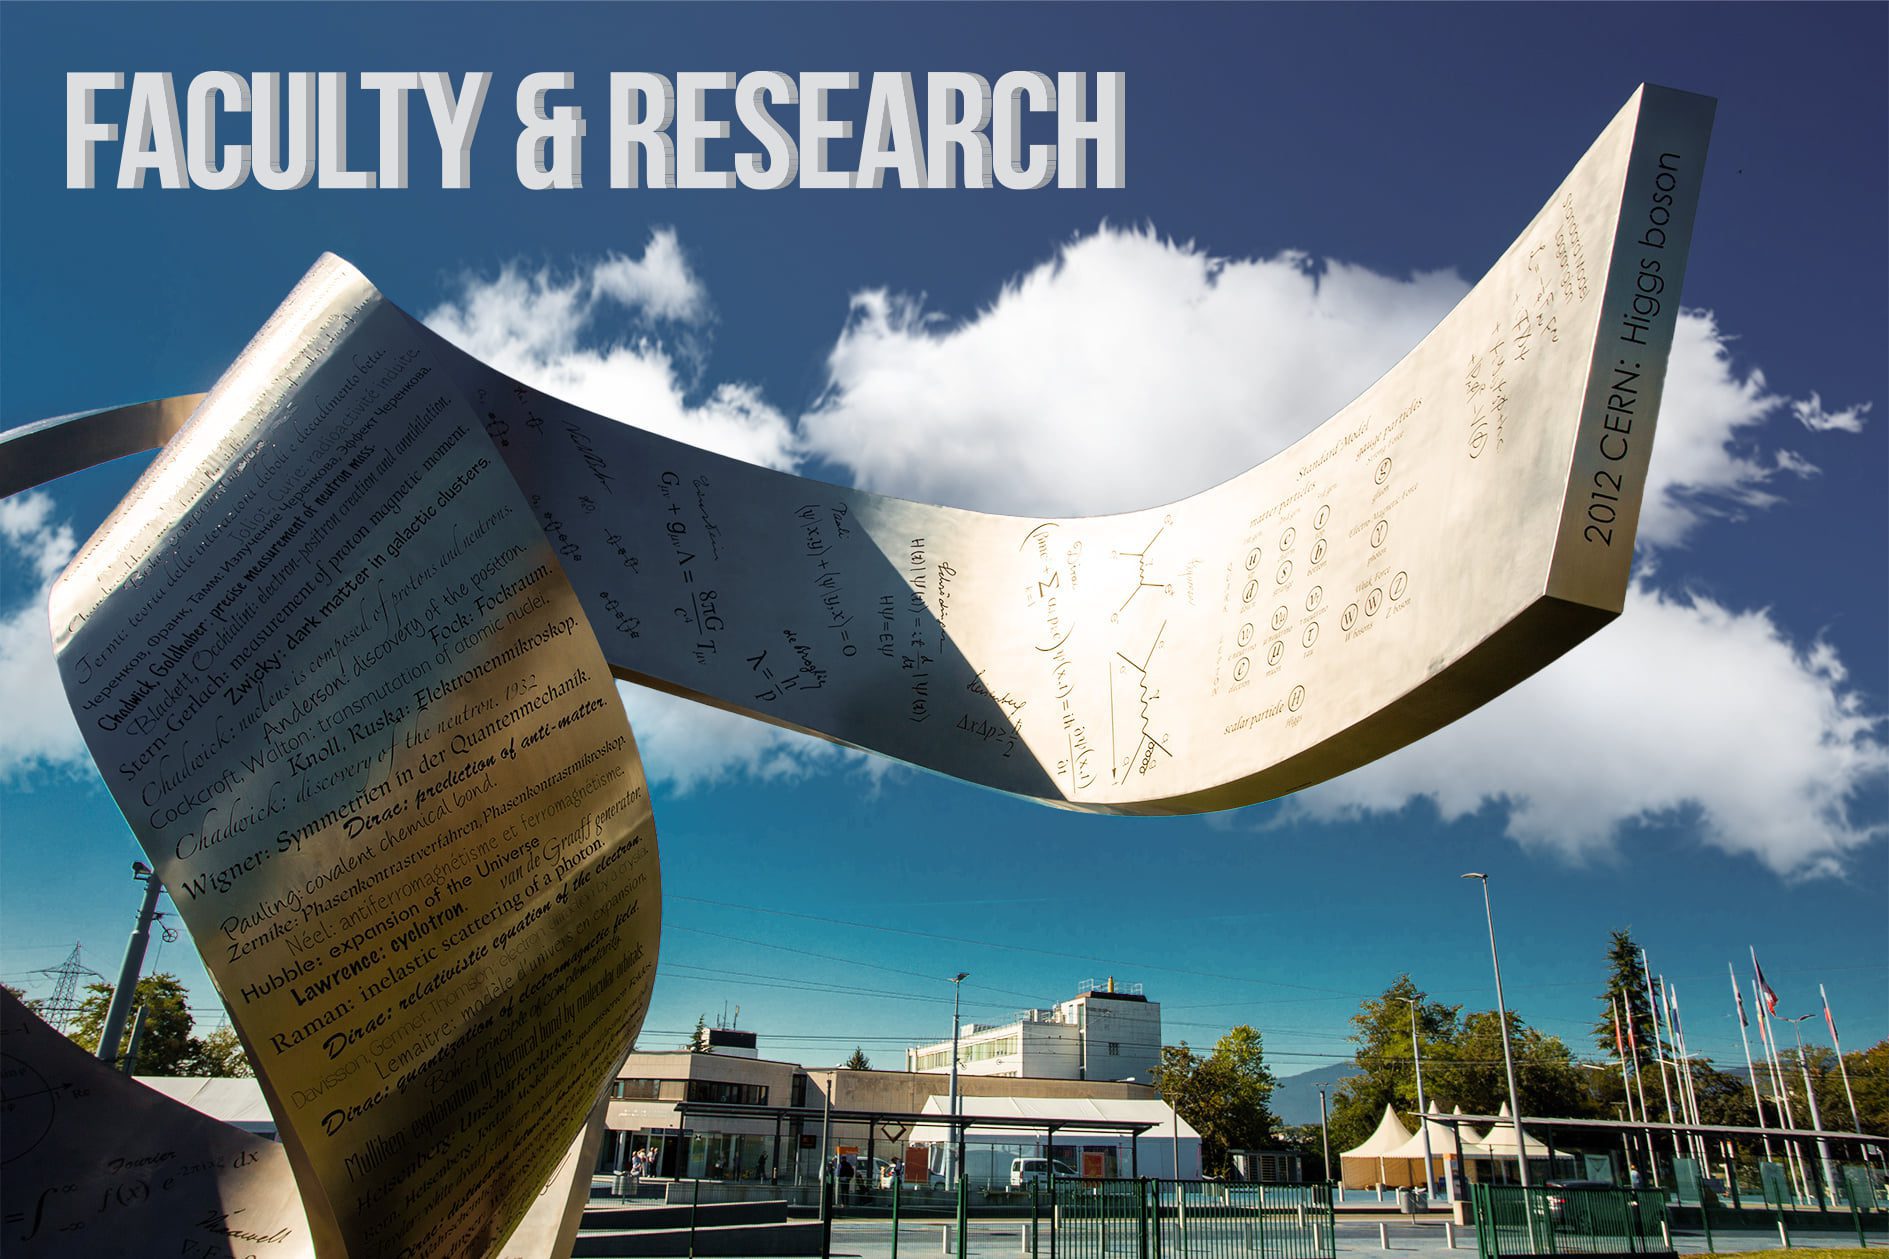 FACULTY & RESEARCH